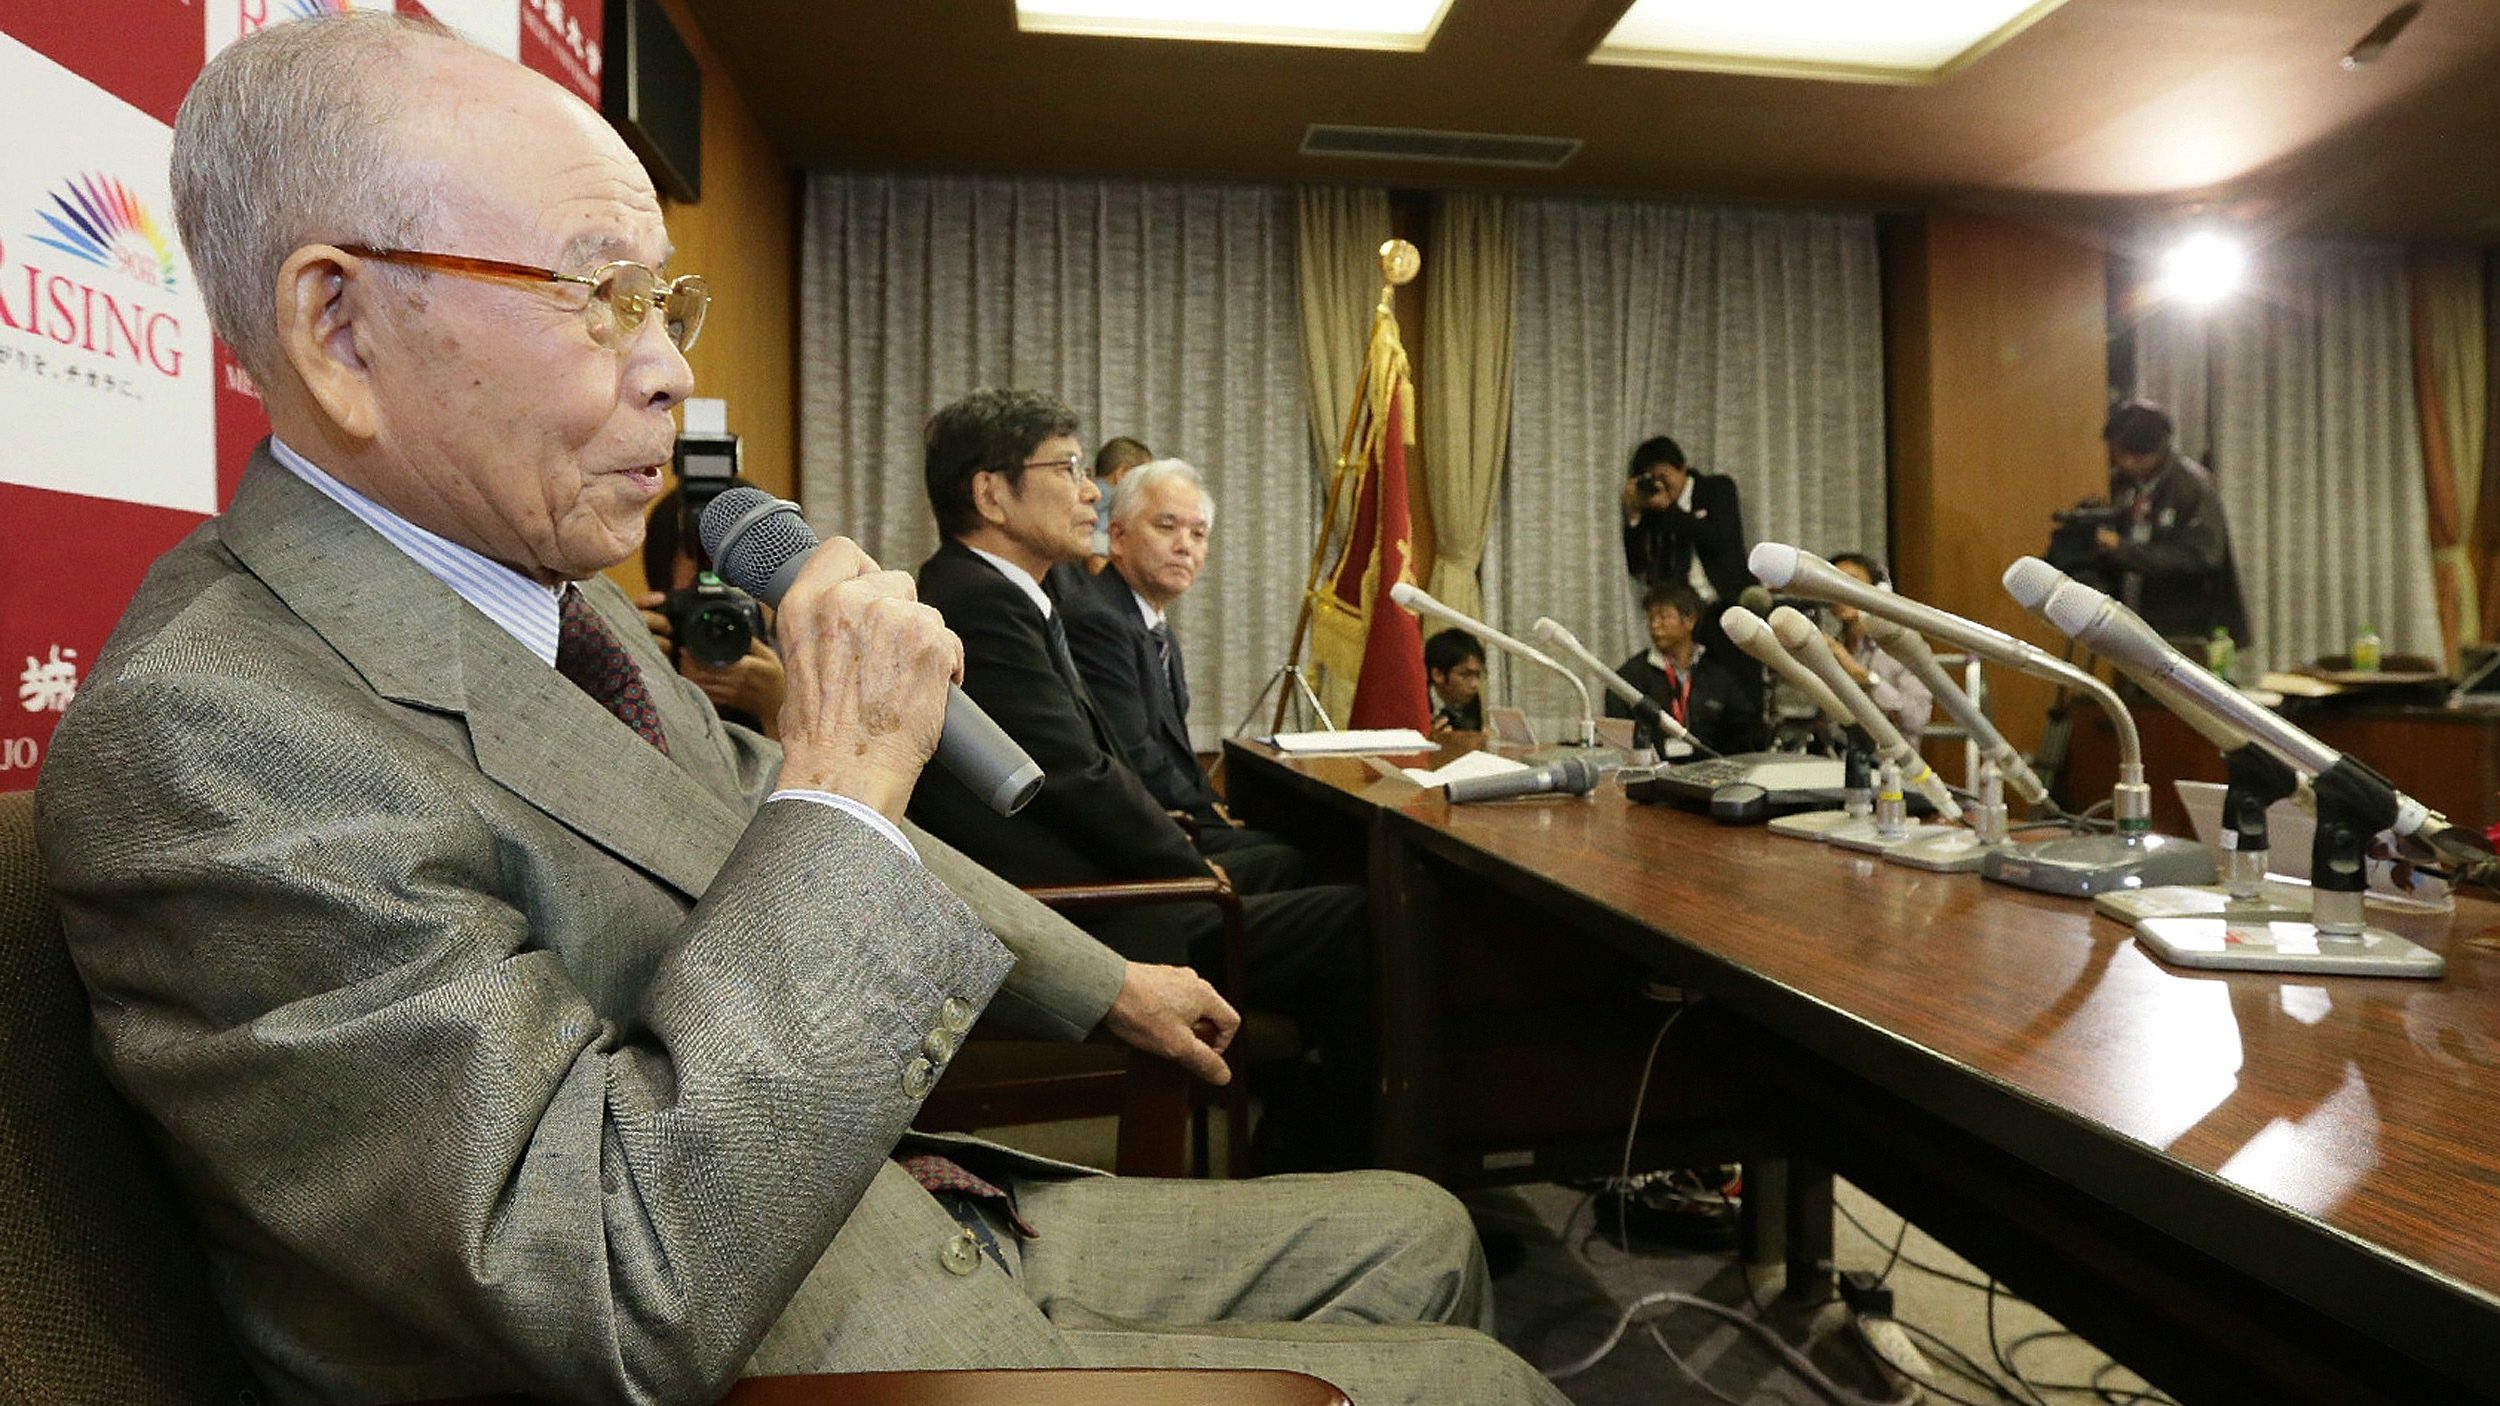 Meijo University professor Isamu Akasaki (left), 85, answers questions during a press conference at the University in Nagoya, central Japan, on October 7, 2014. 